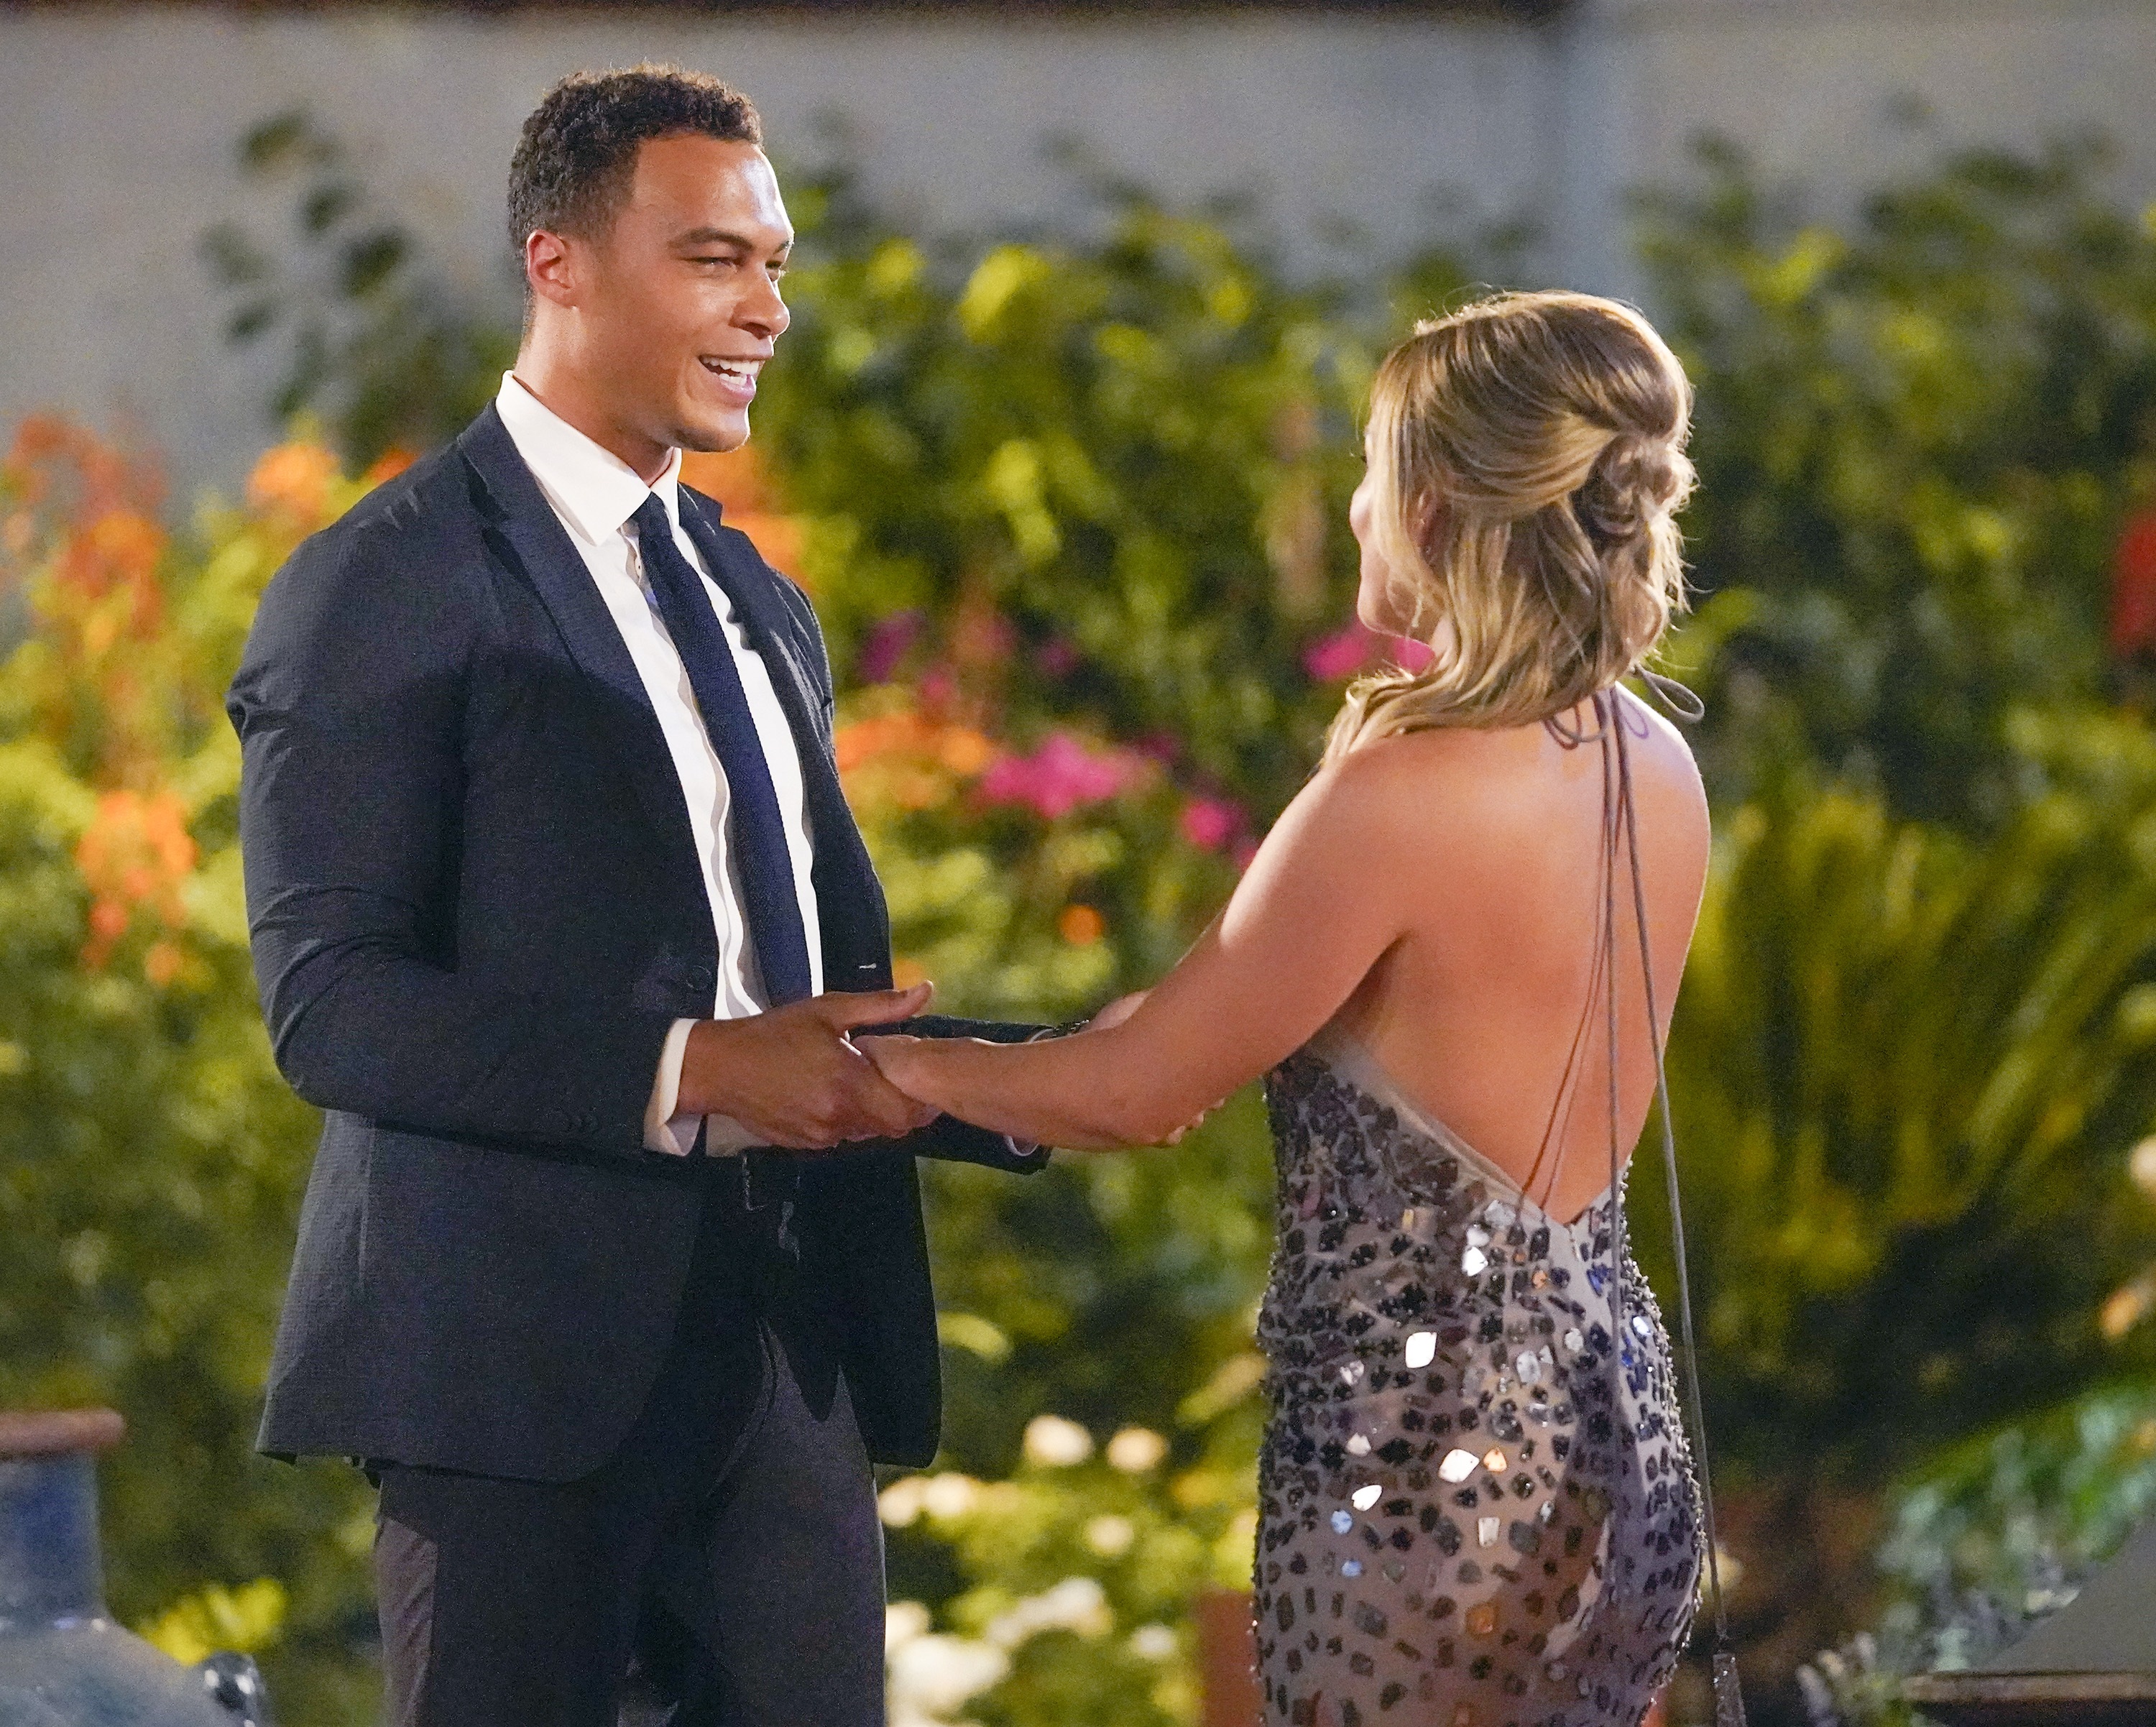 'The Bachelorette' lead Clare Crawley and contestant Dale Moss